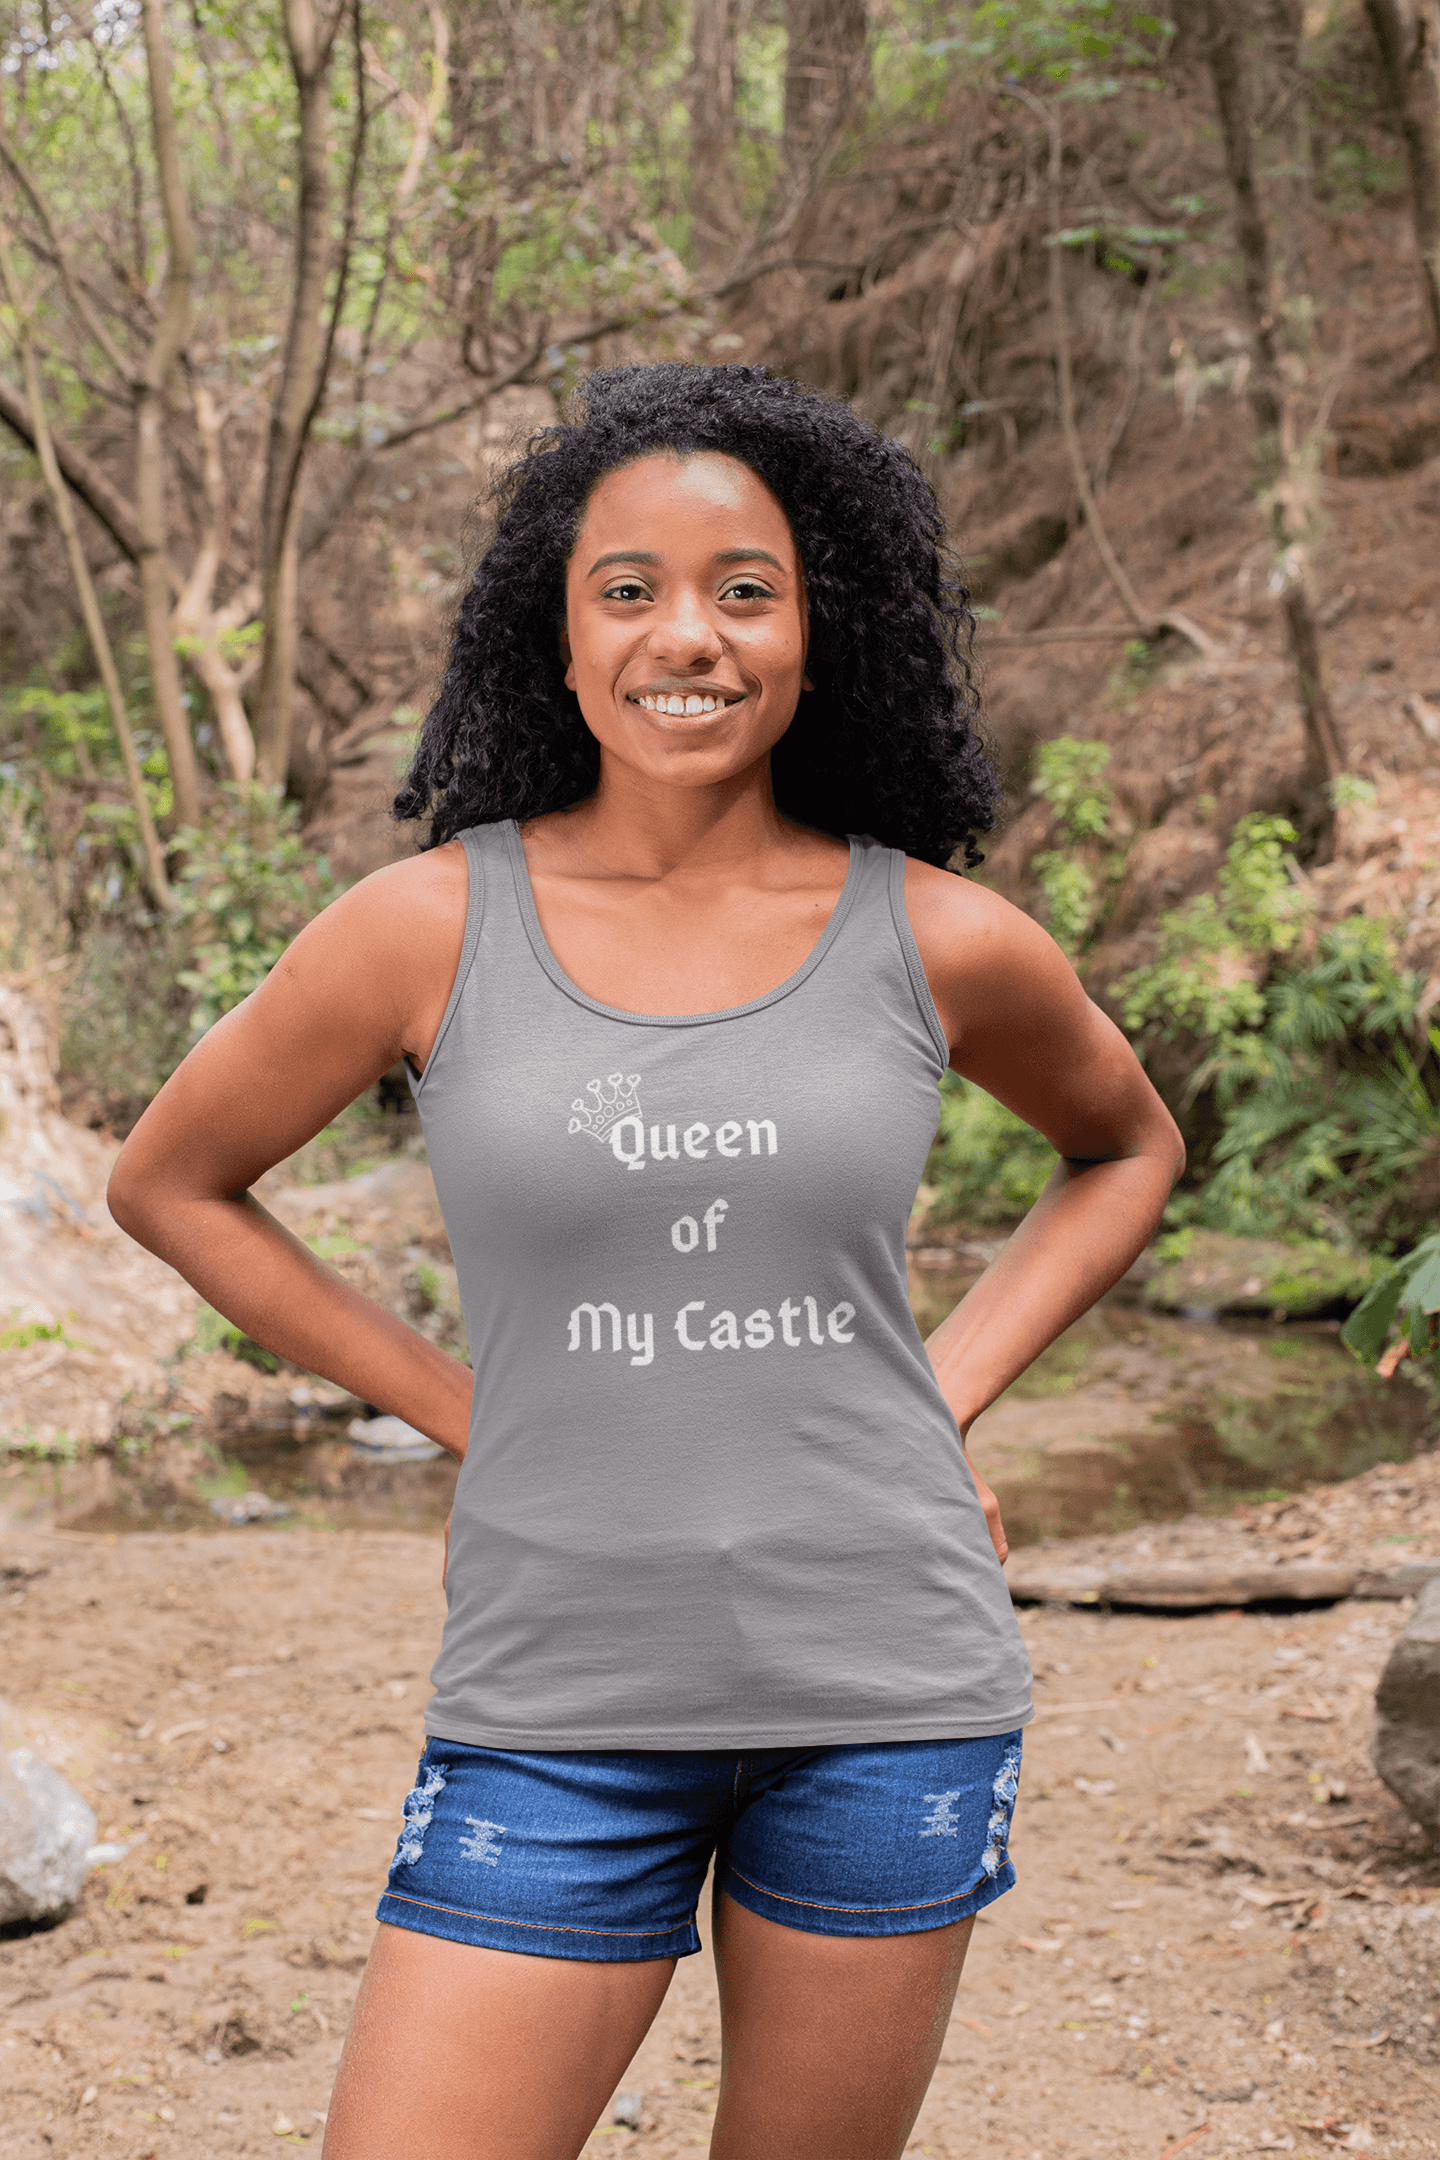 Queen of My Castle Tank Top - Sharp Tact Kreativ | Tees & Gifts with Encouraging Messages to Brighten Your Day with a Bit of Wit